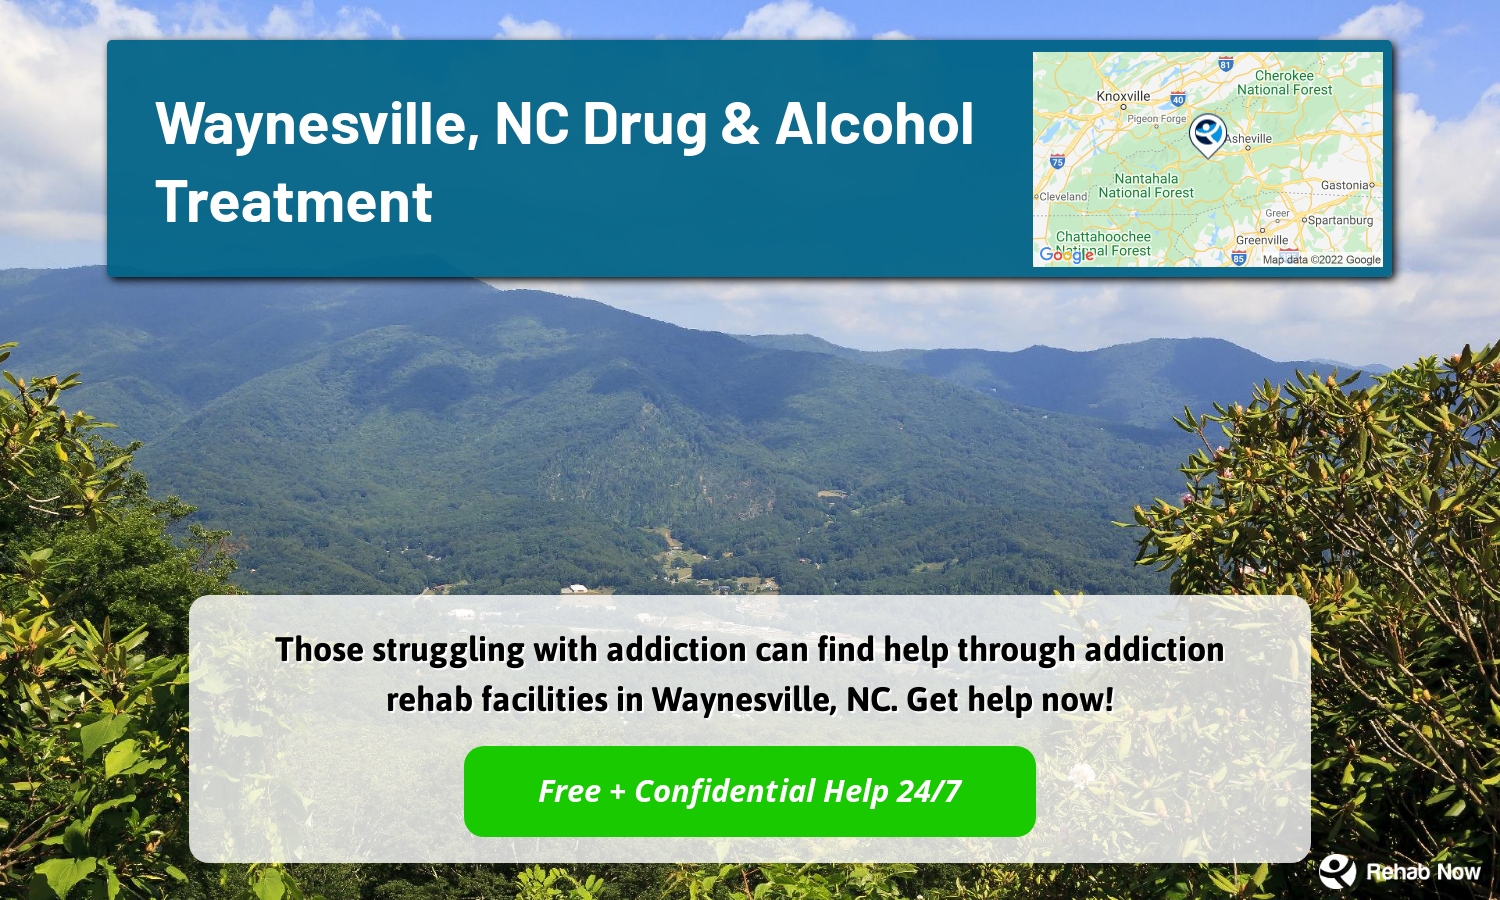 Those struggling with addiction can find help through addiction rehab facilities in Waynesville, NC. Get help now!